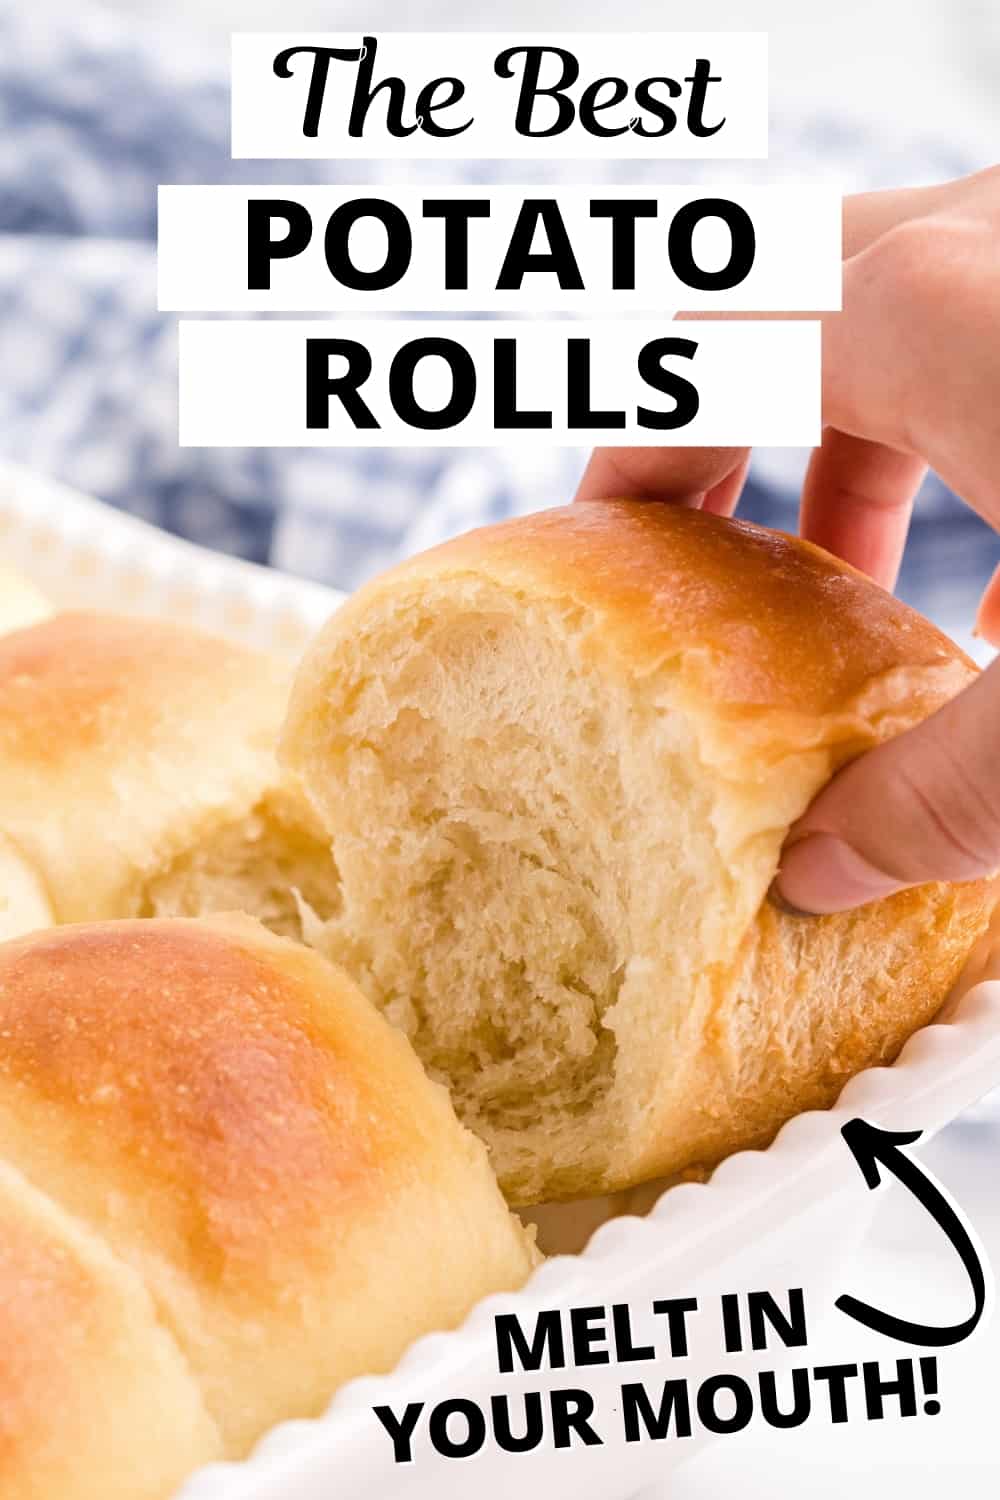 The Best Potato Rolls - they will melt in your mouth!